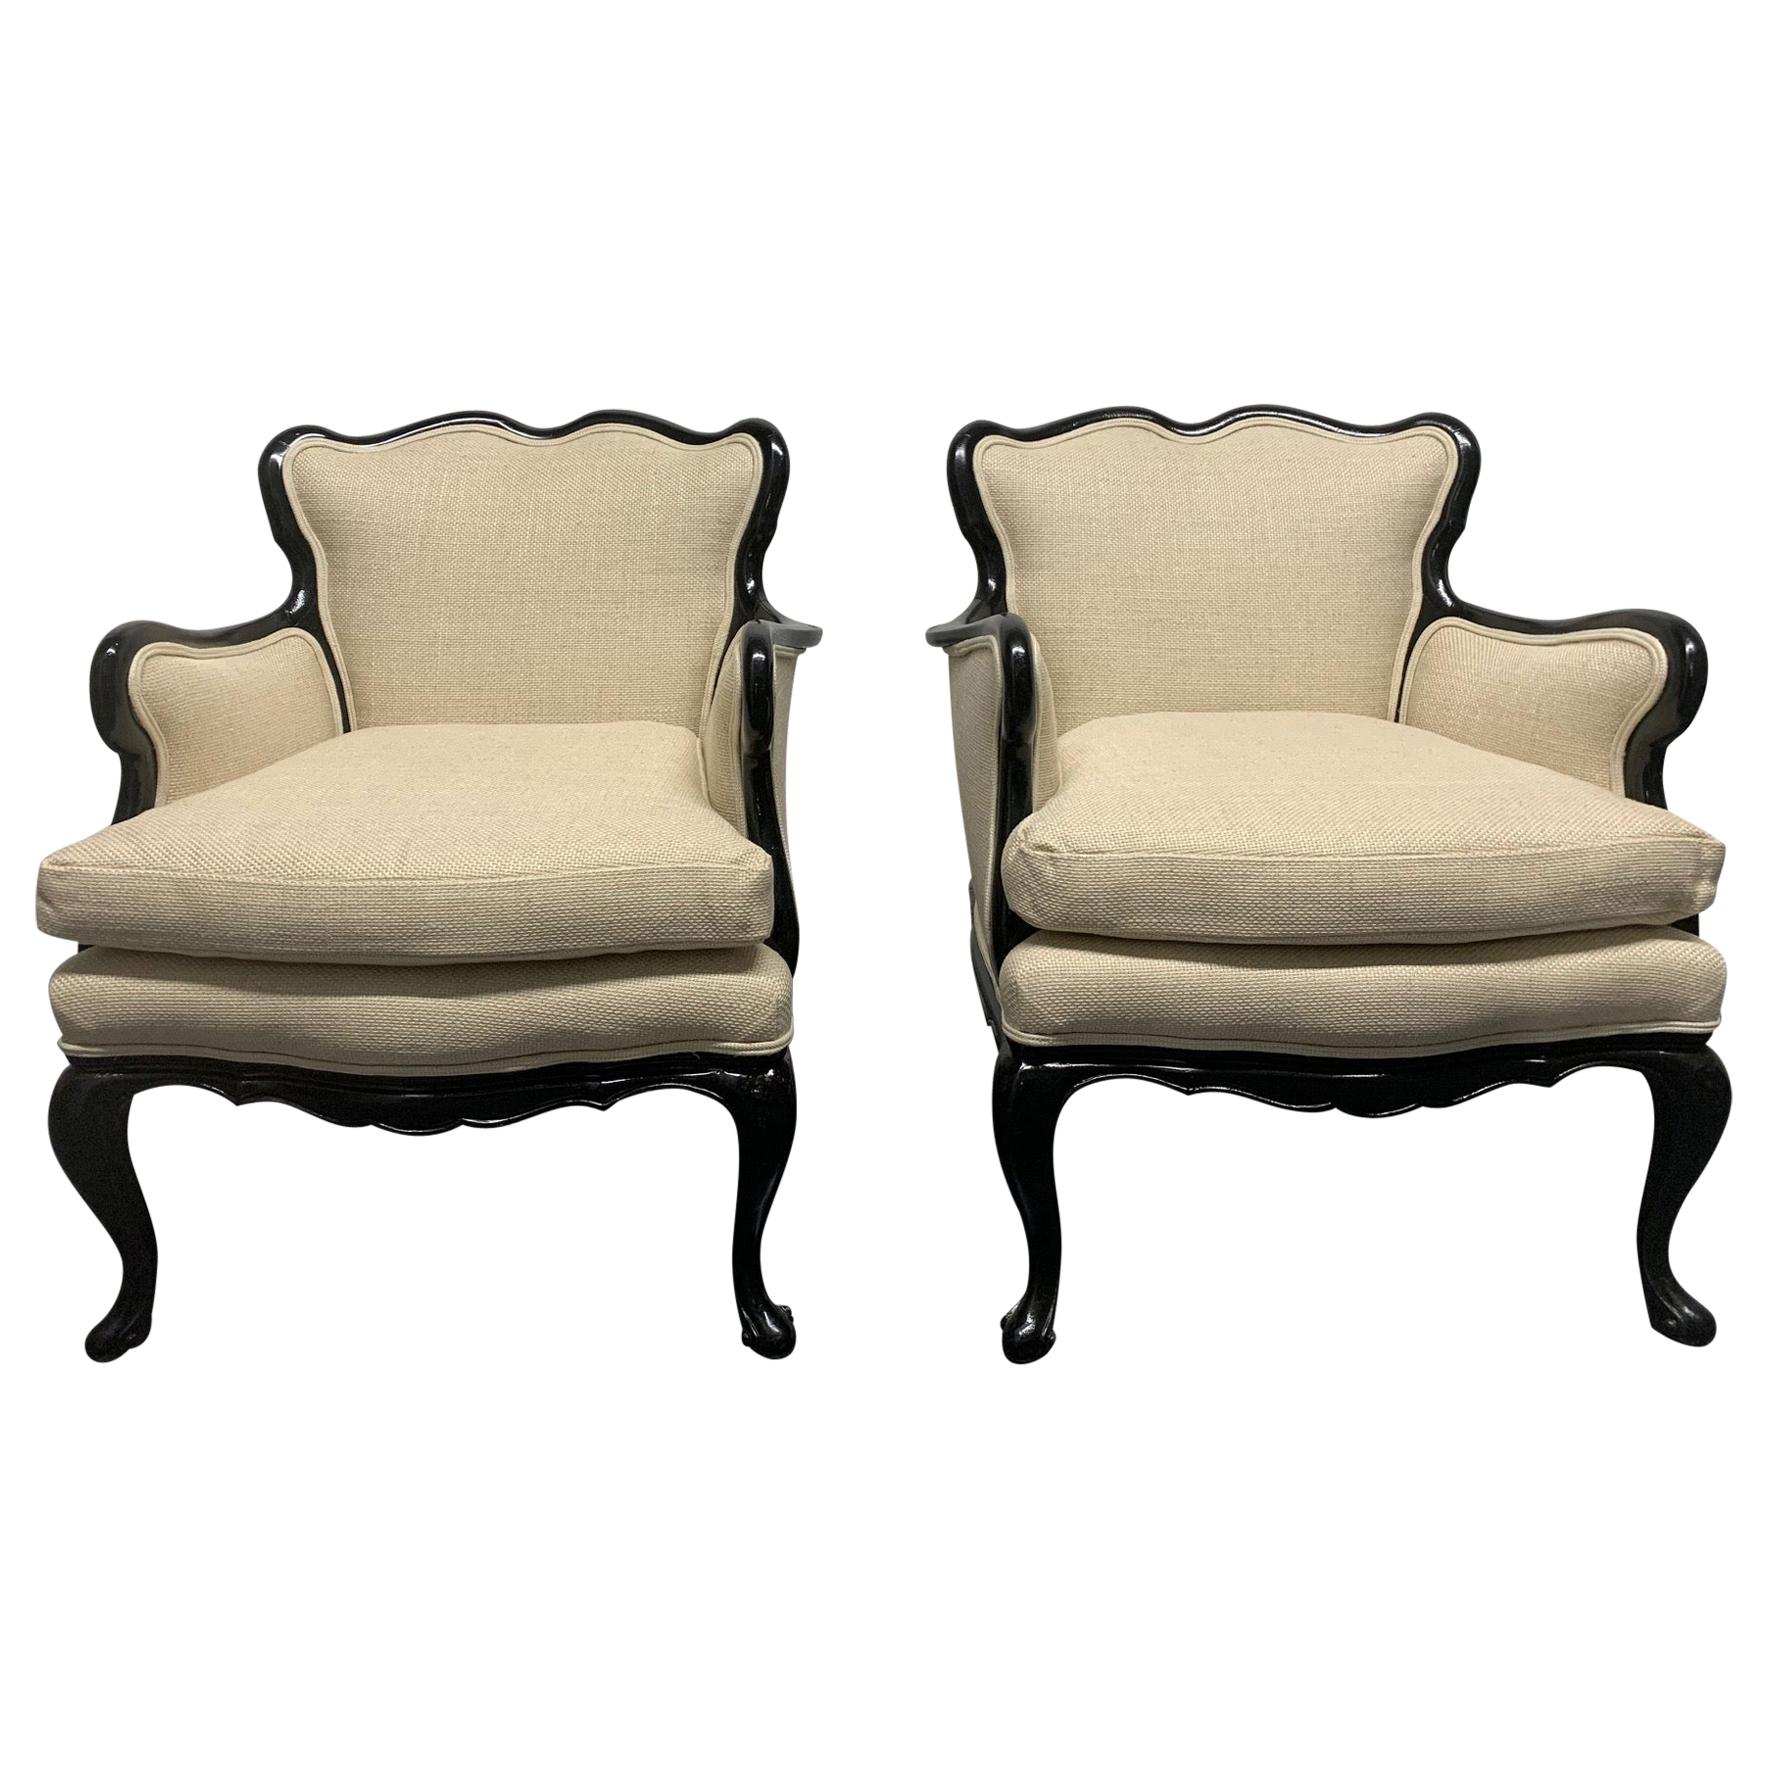 Pair of French Antique Style Lounge Chairs in Linen For Sale